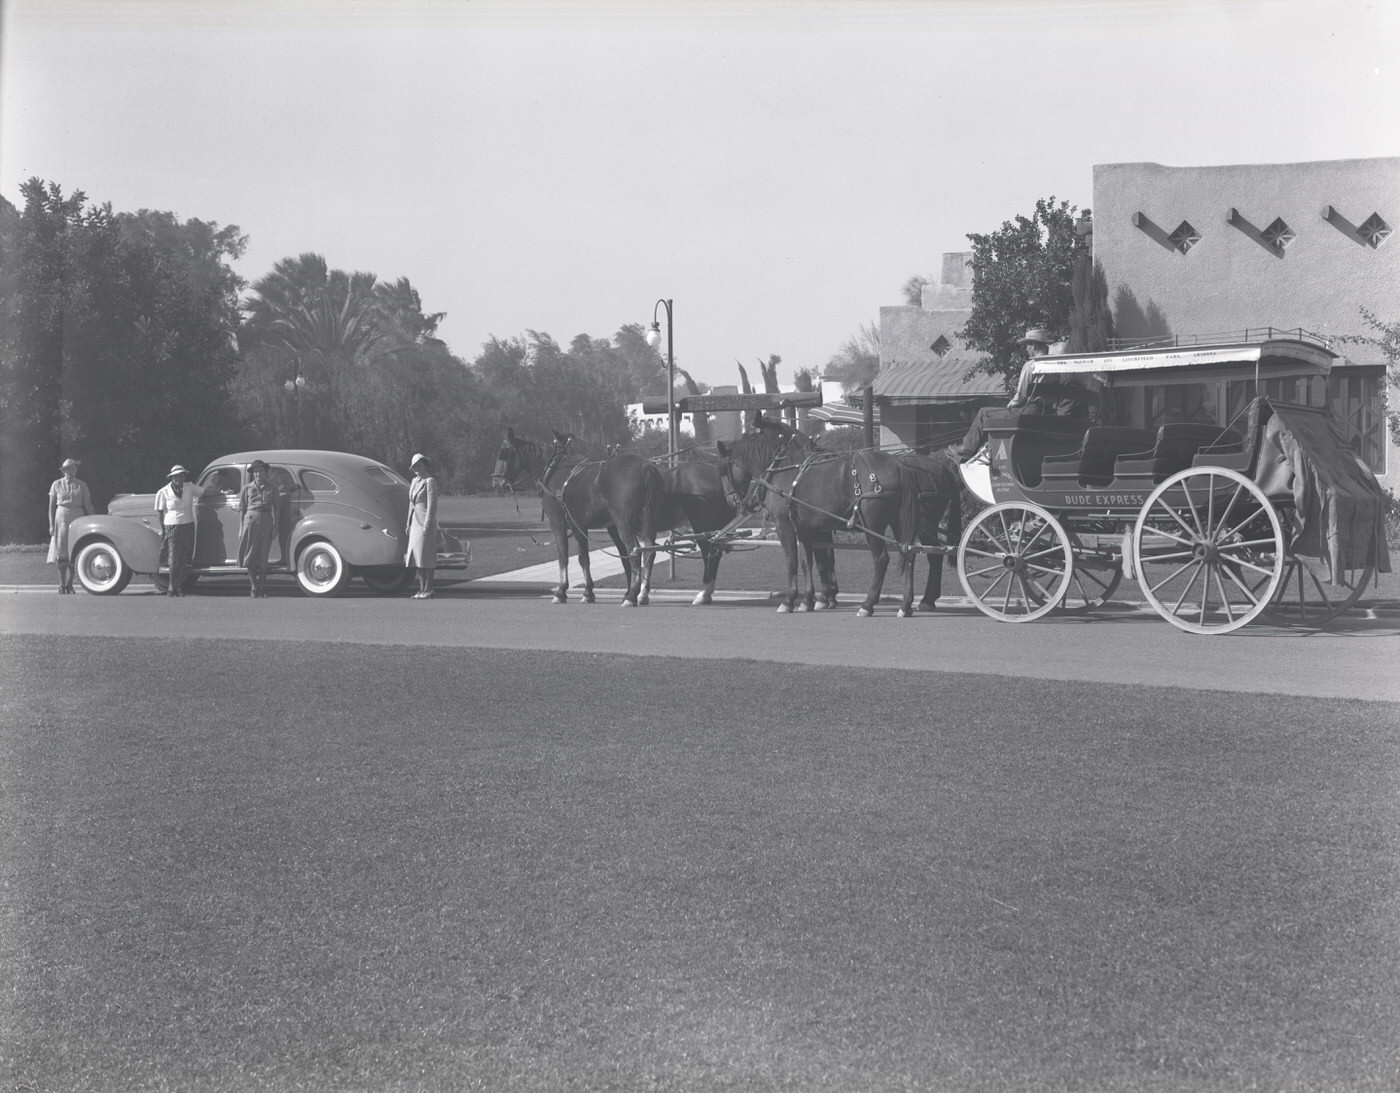 Wigwam Resort Guests in a Stage Coach, 1929